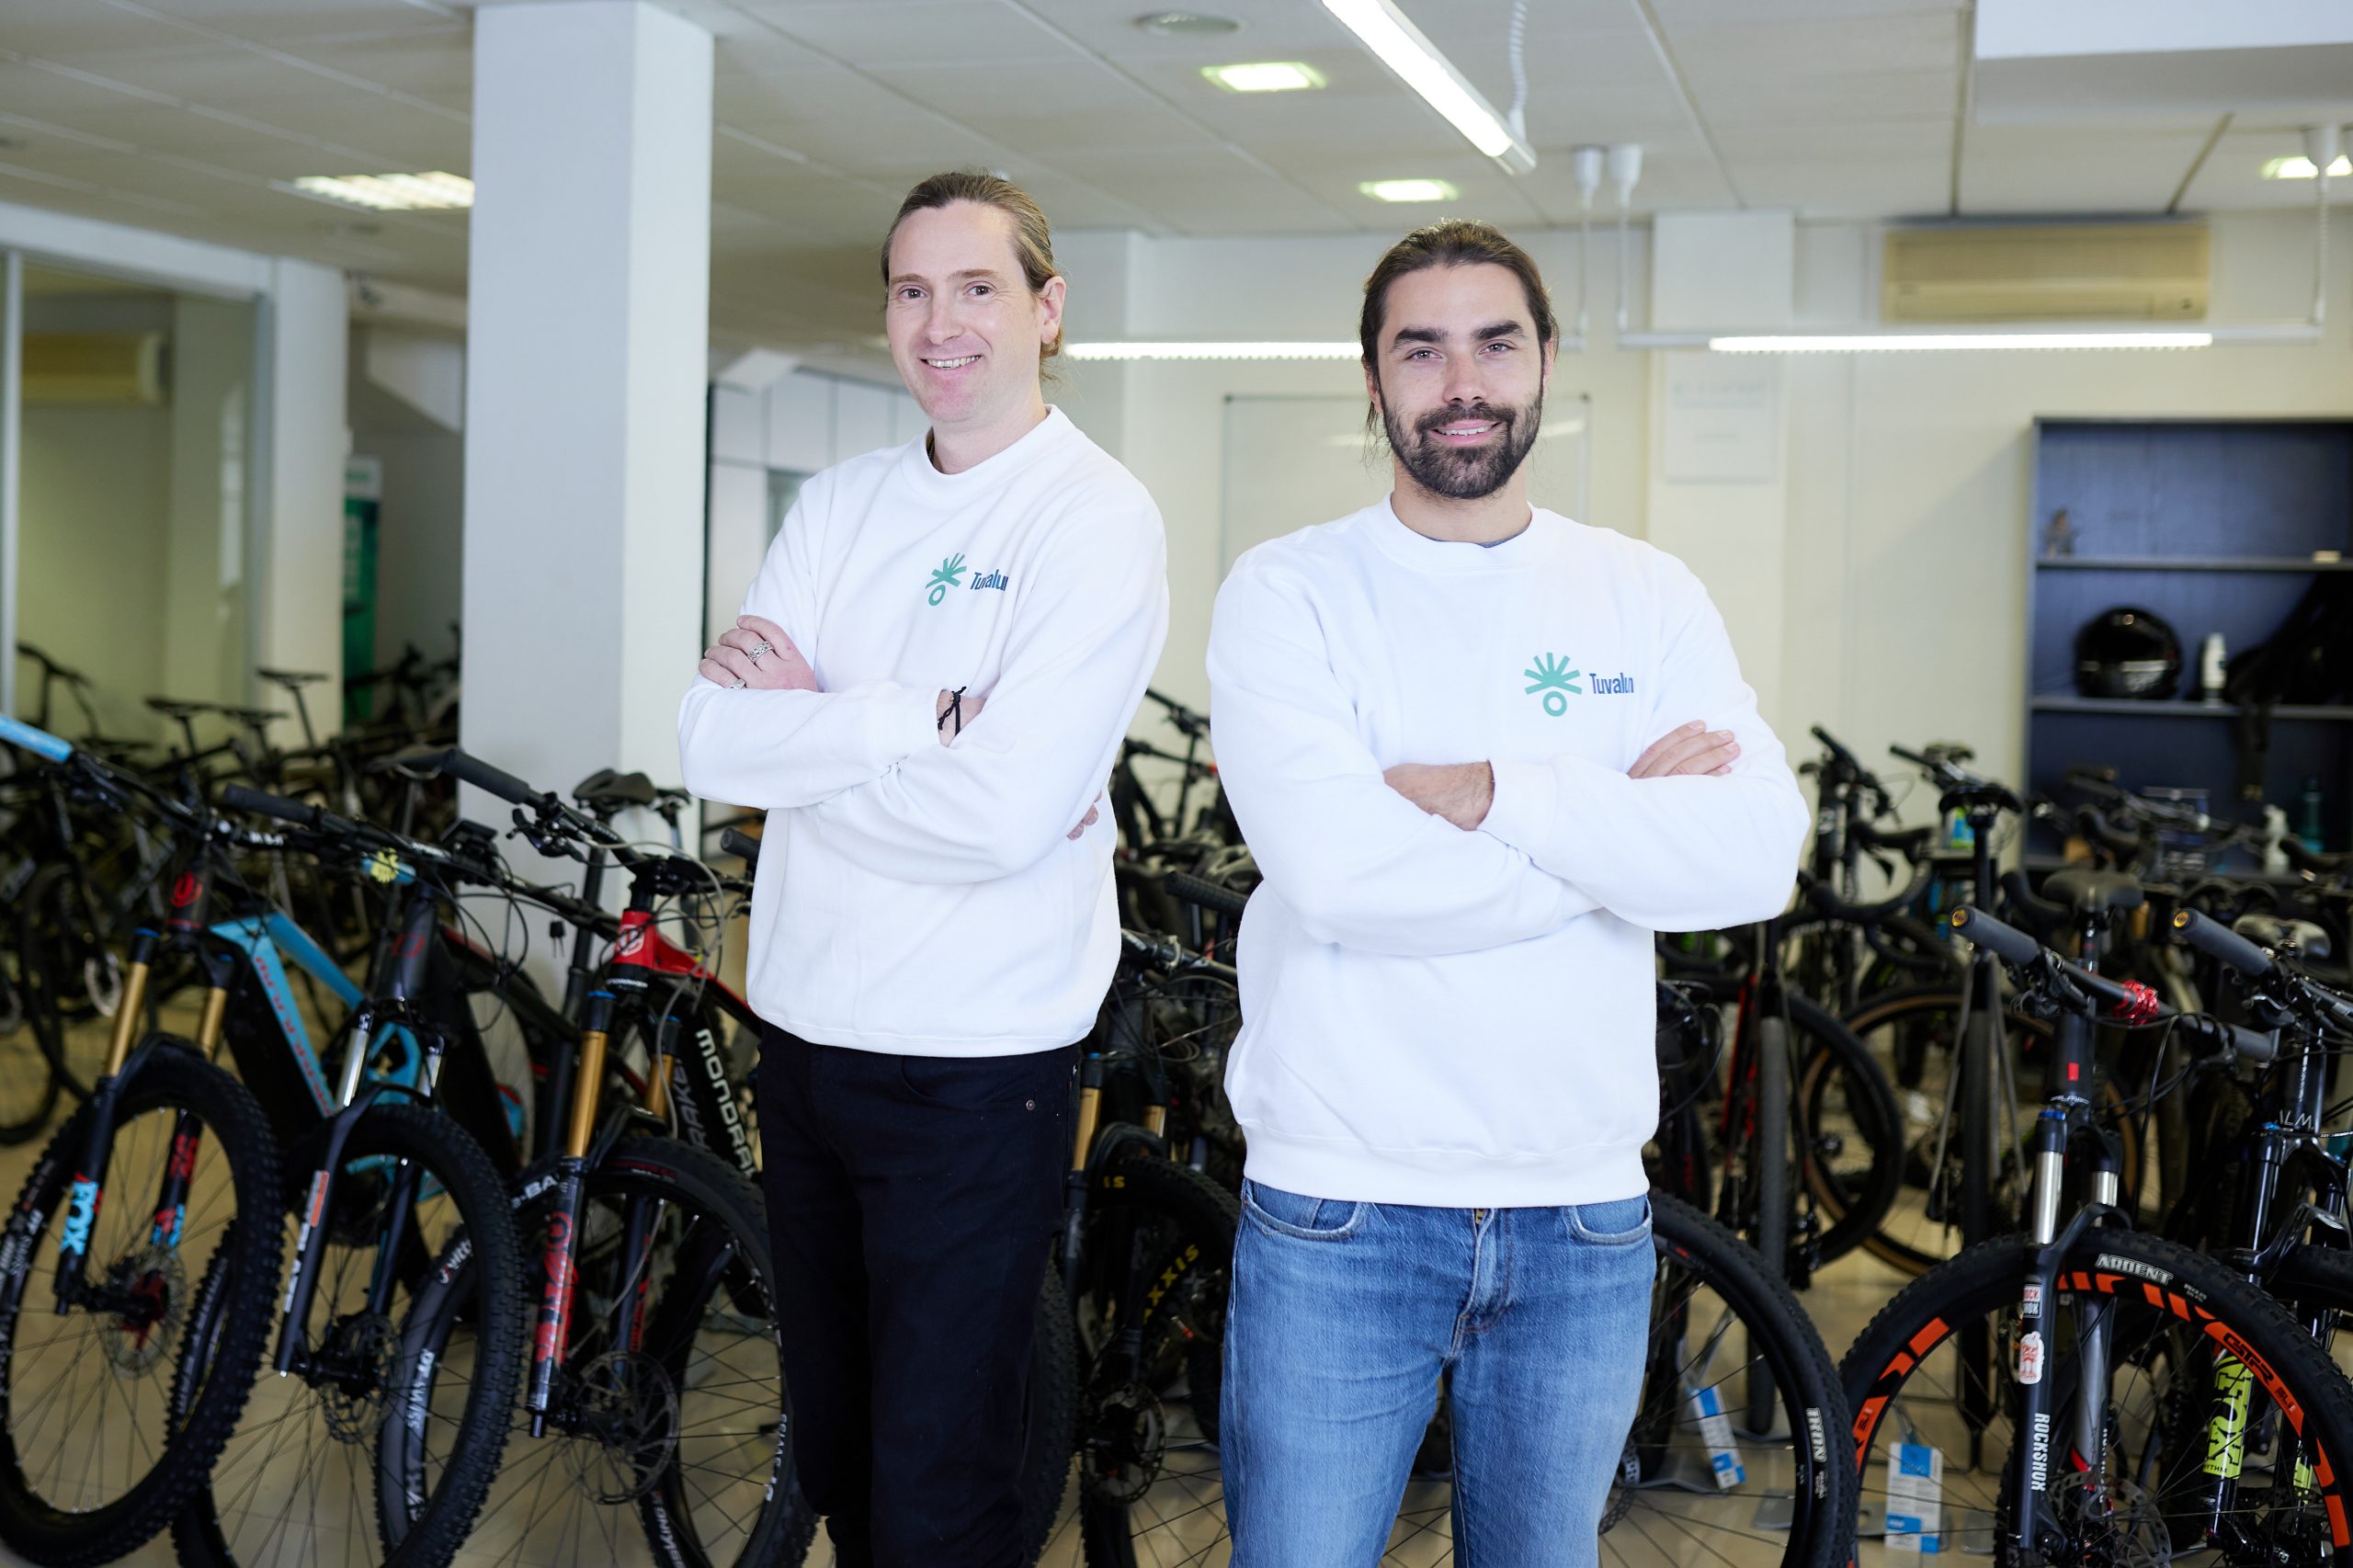 Bike trading startup Tuvalum closes €3M Series A round to accelerate growth in Europe